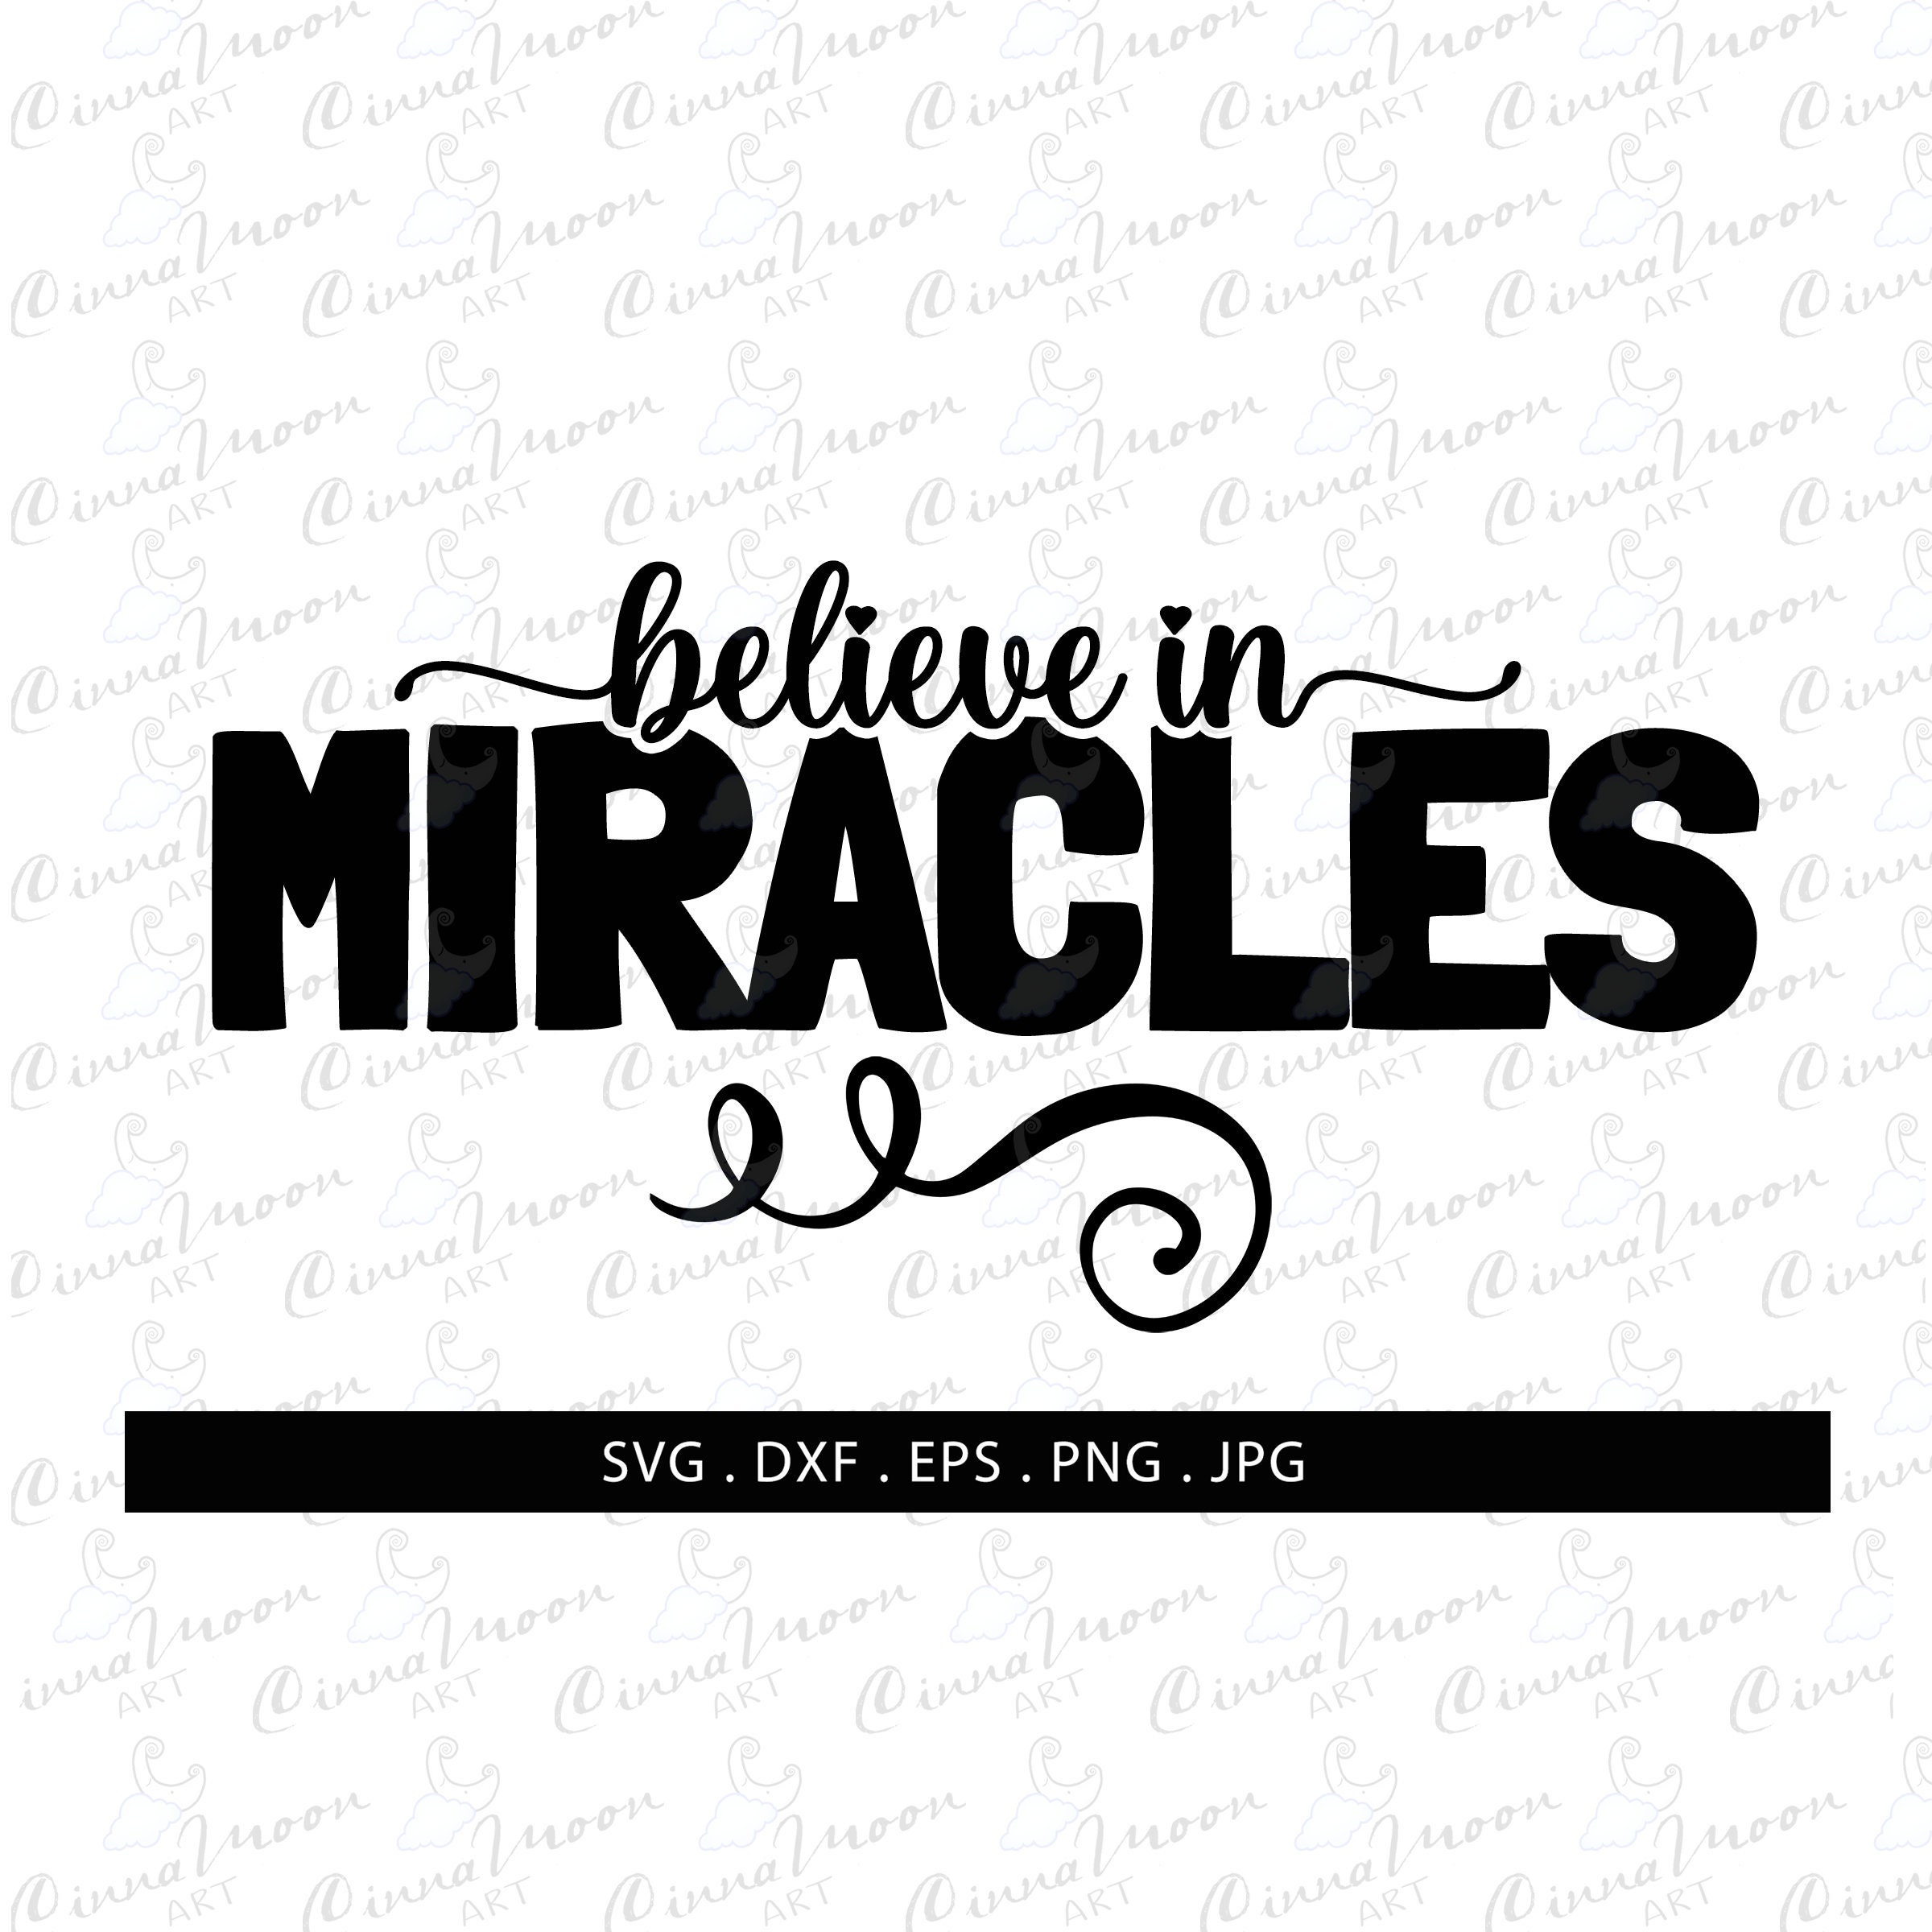 Believe in miracles svg-Believe in miracles dxf-Miracles | Etsy